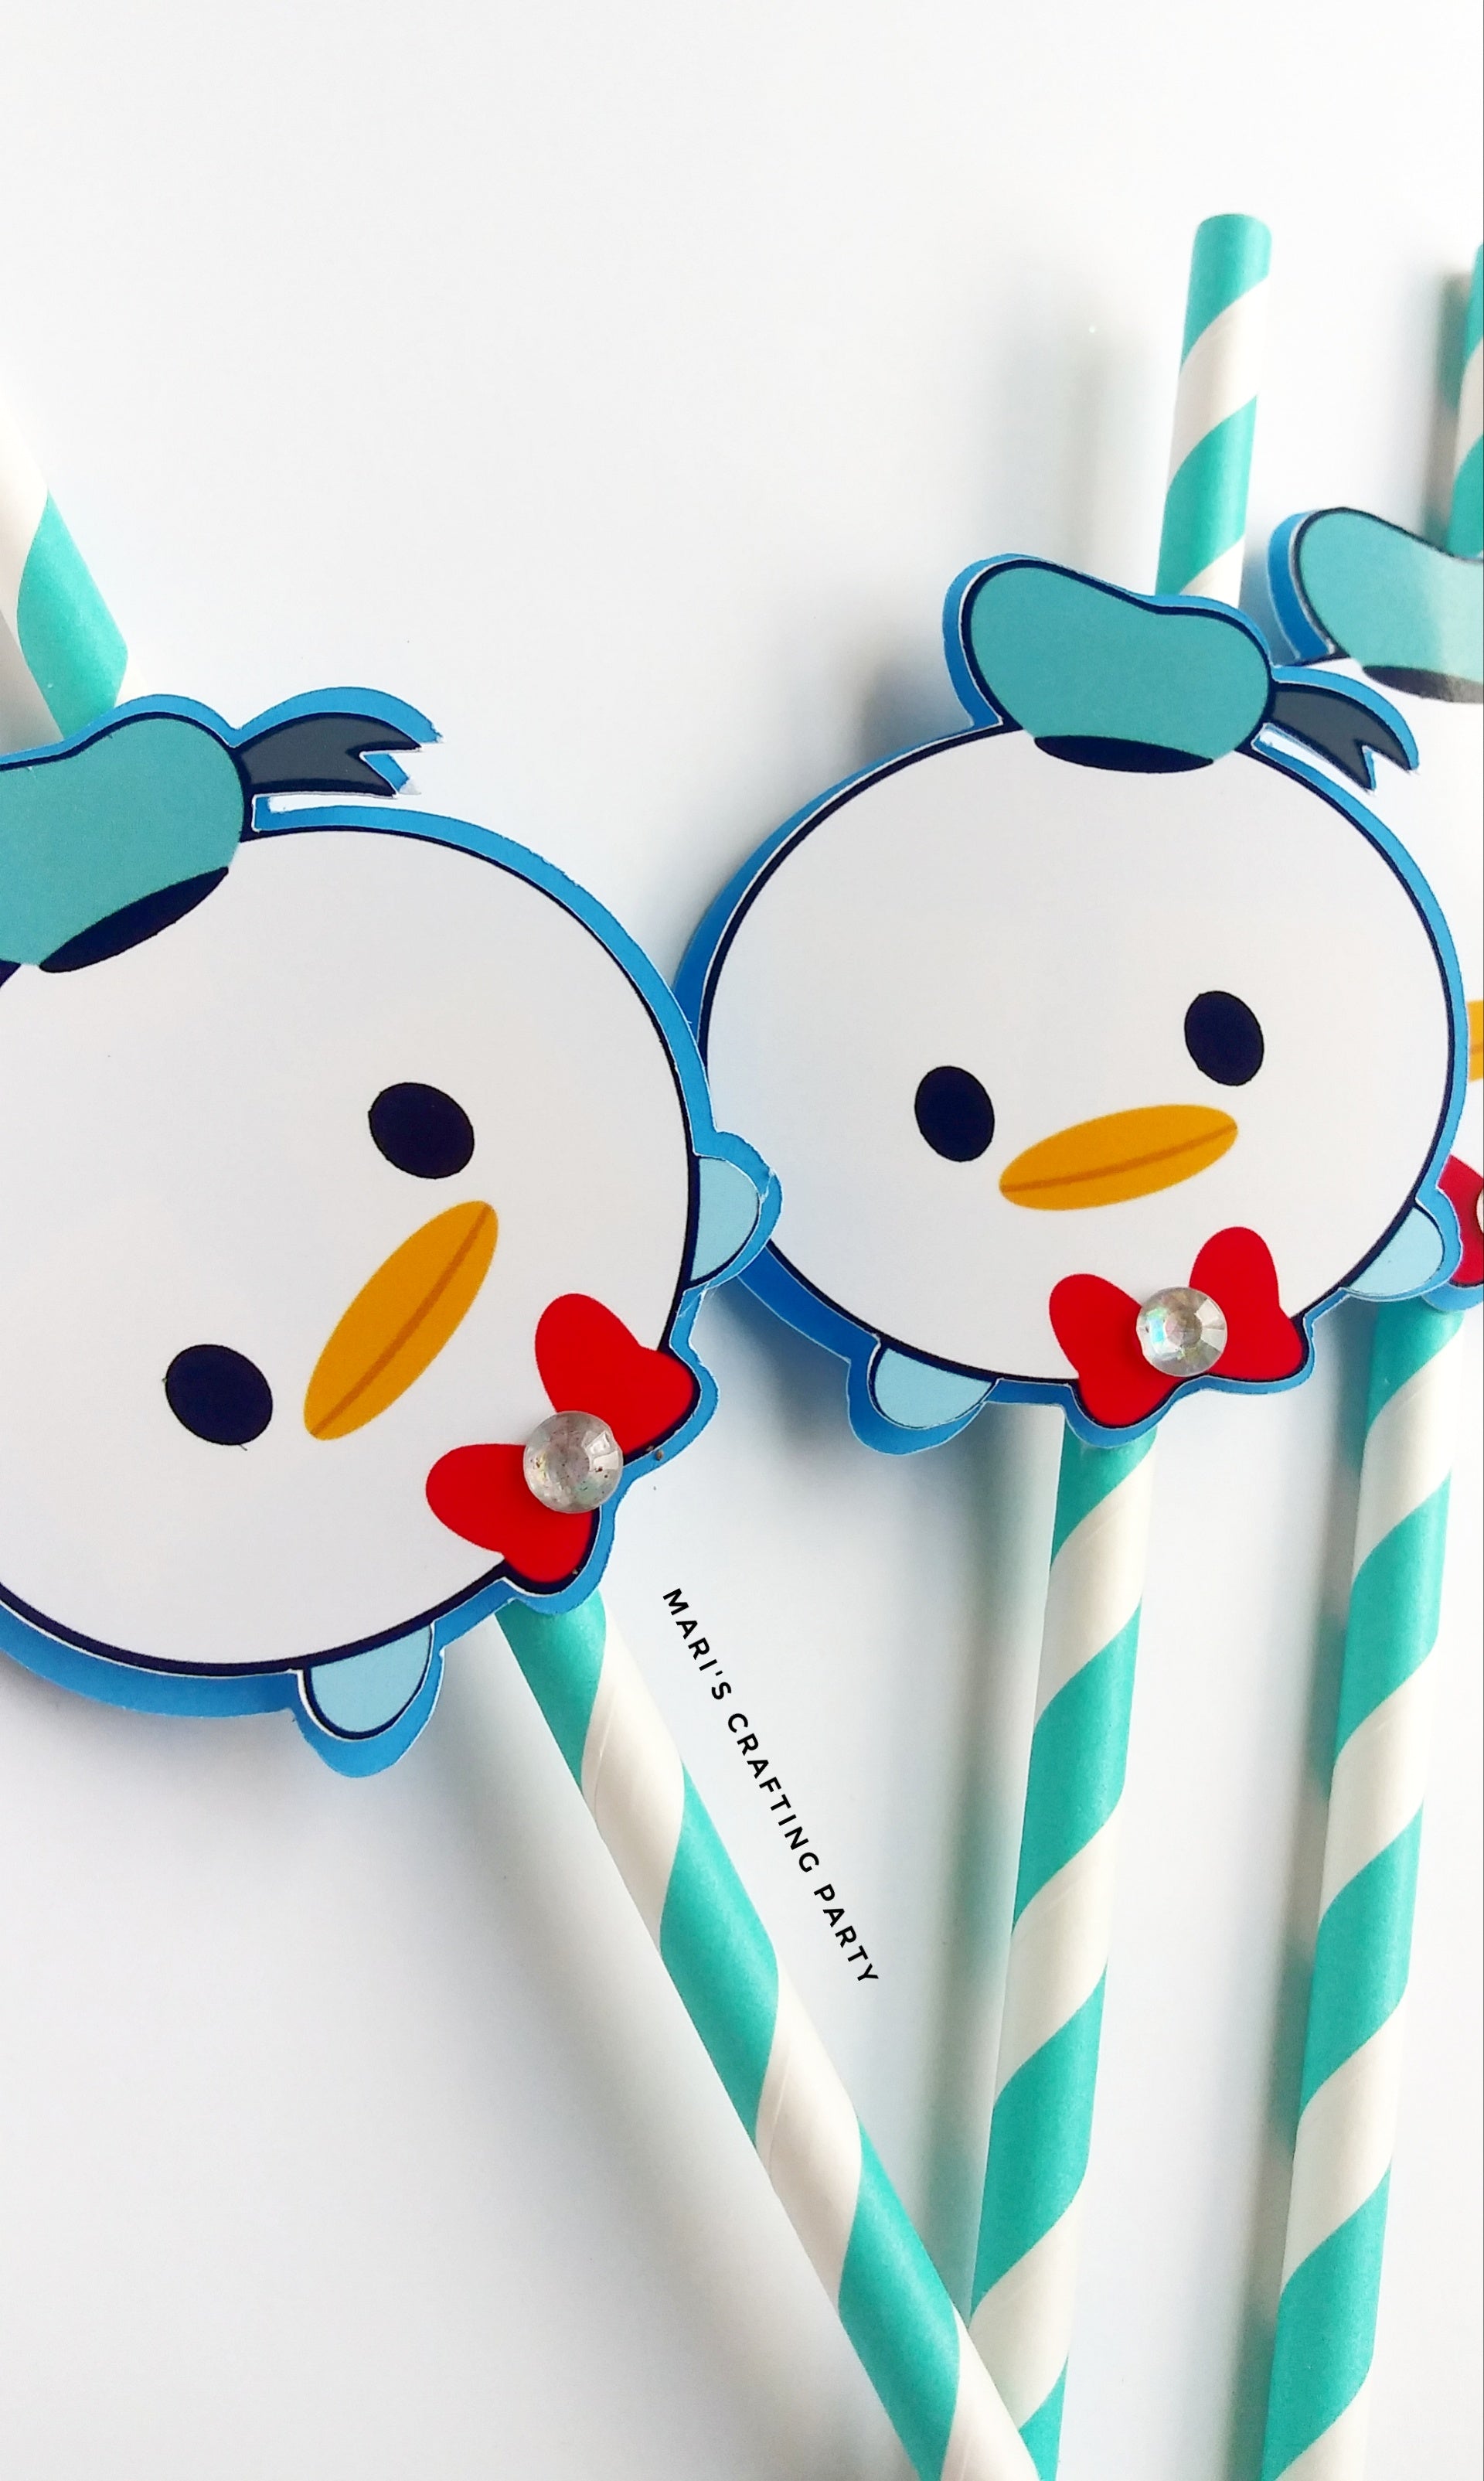 Adorable Donald Duck Party Straws - Daisy Duck straws for girl